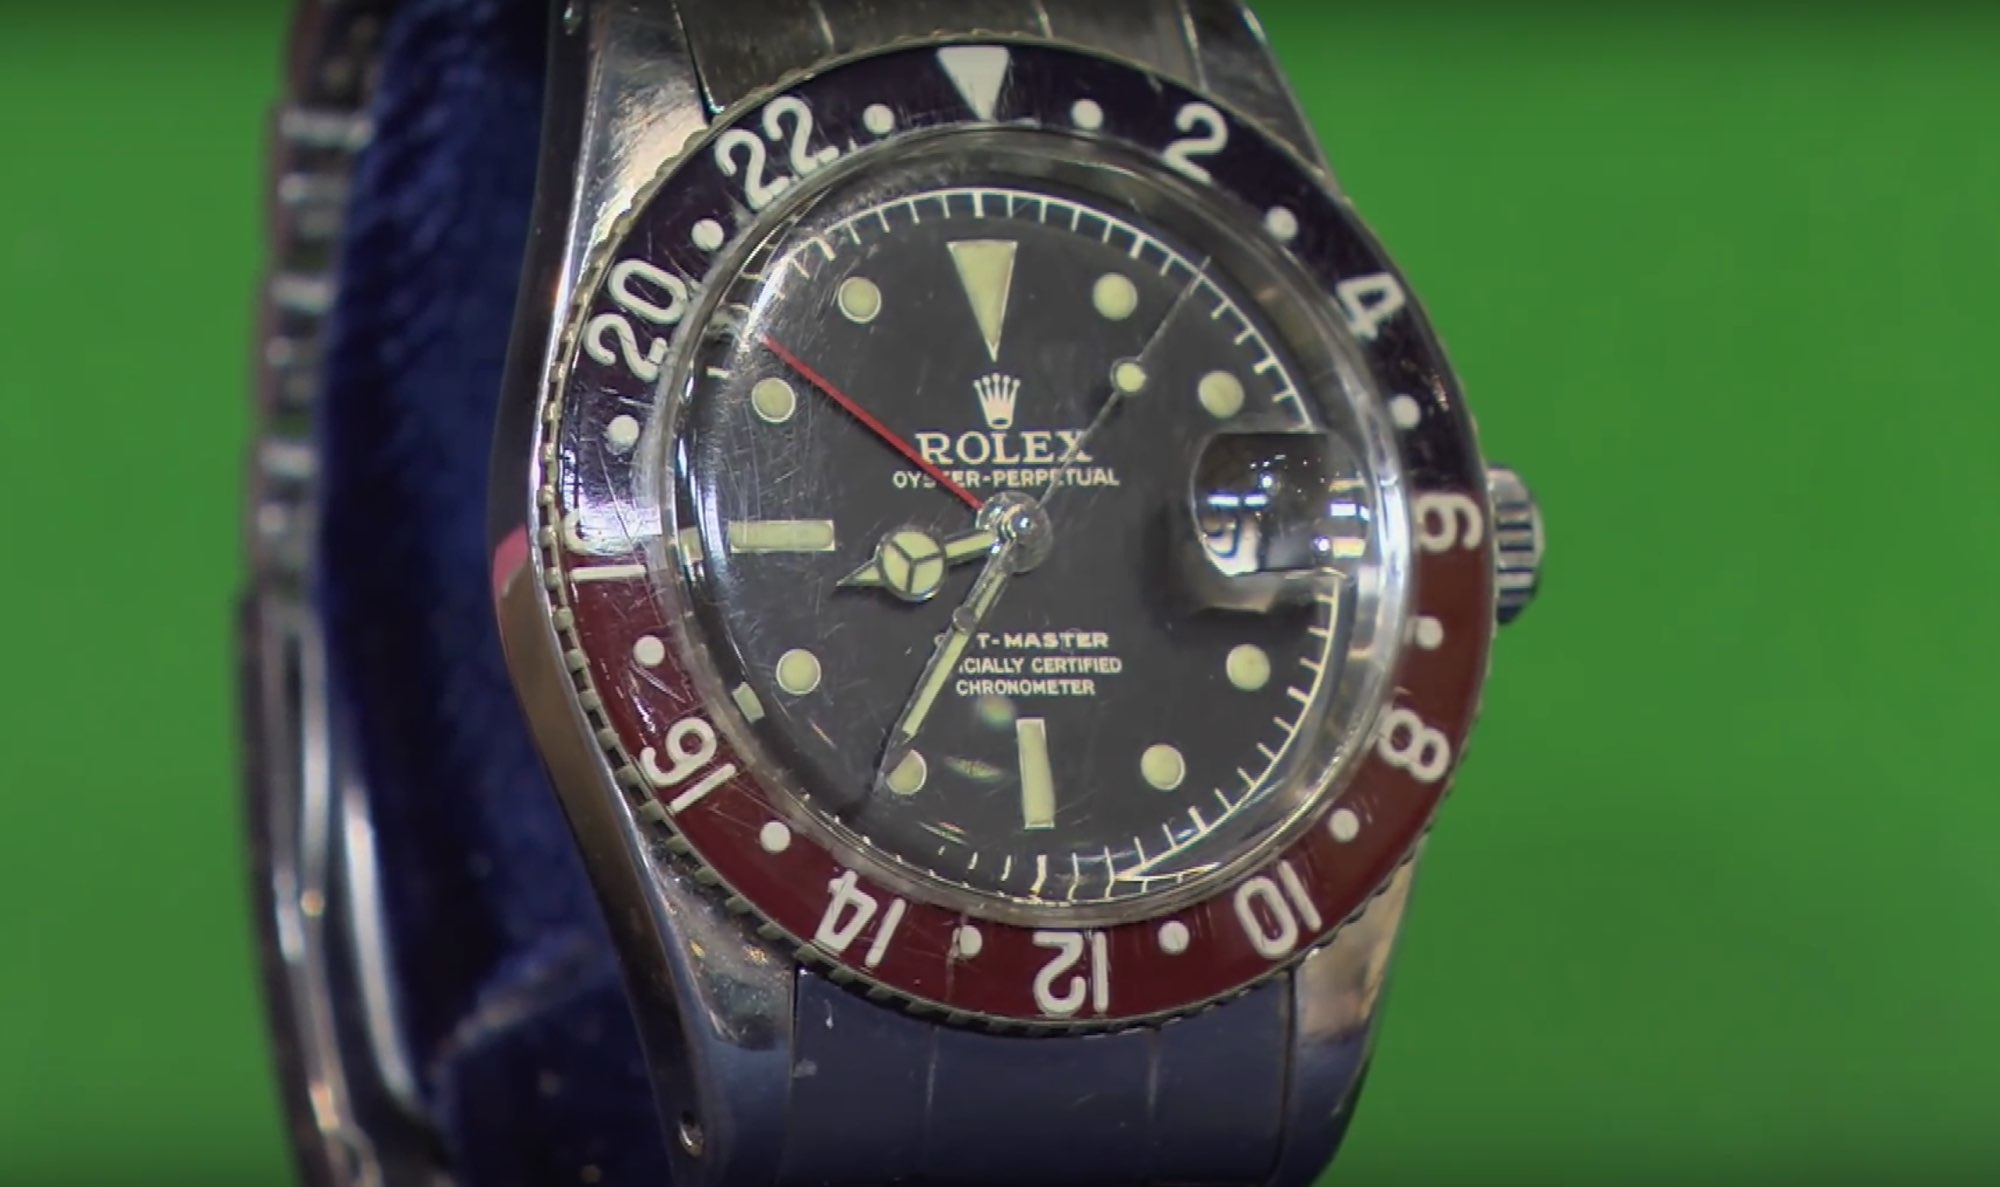 Rolex GMT Master Ref. 6542 surfaces on 